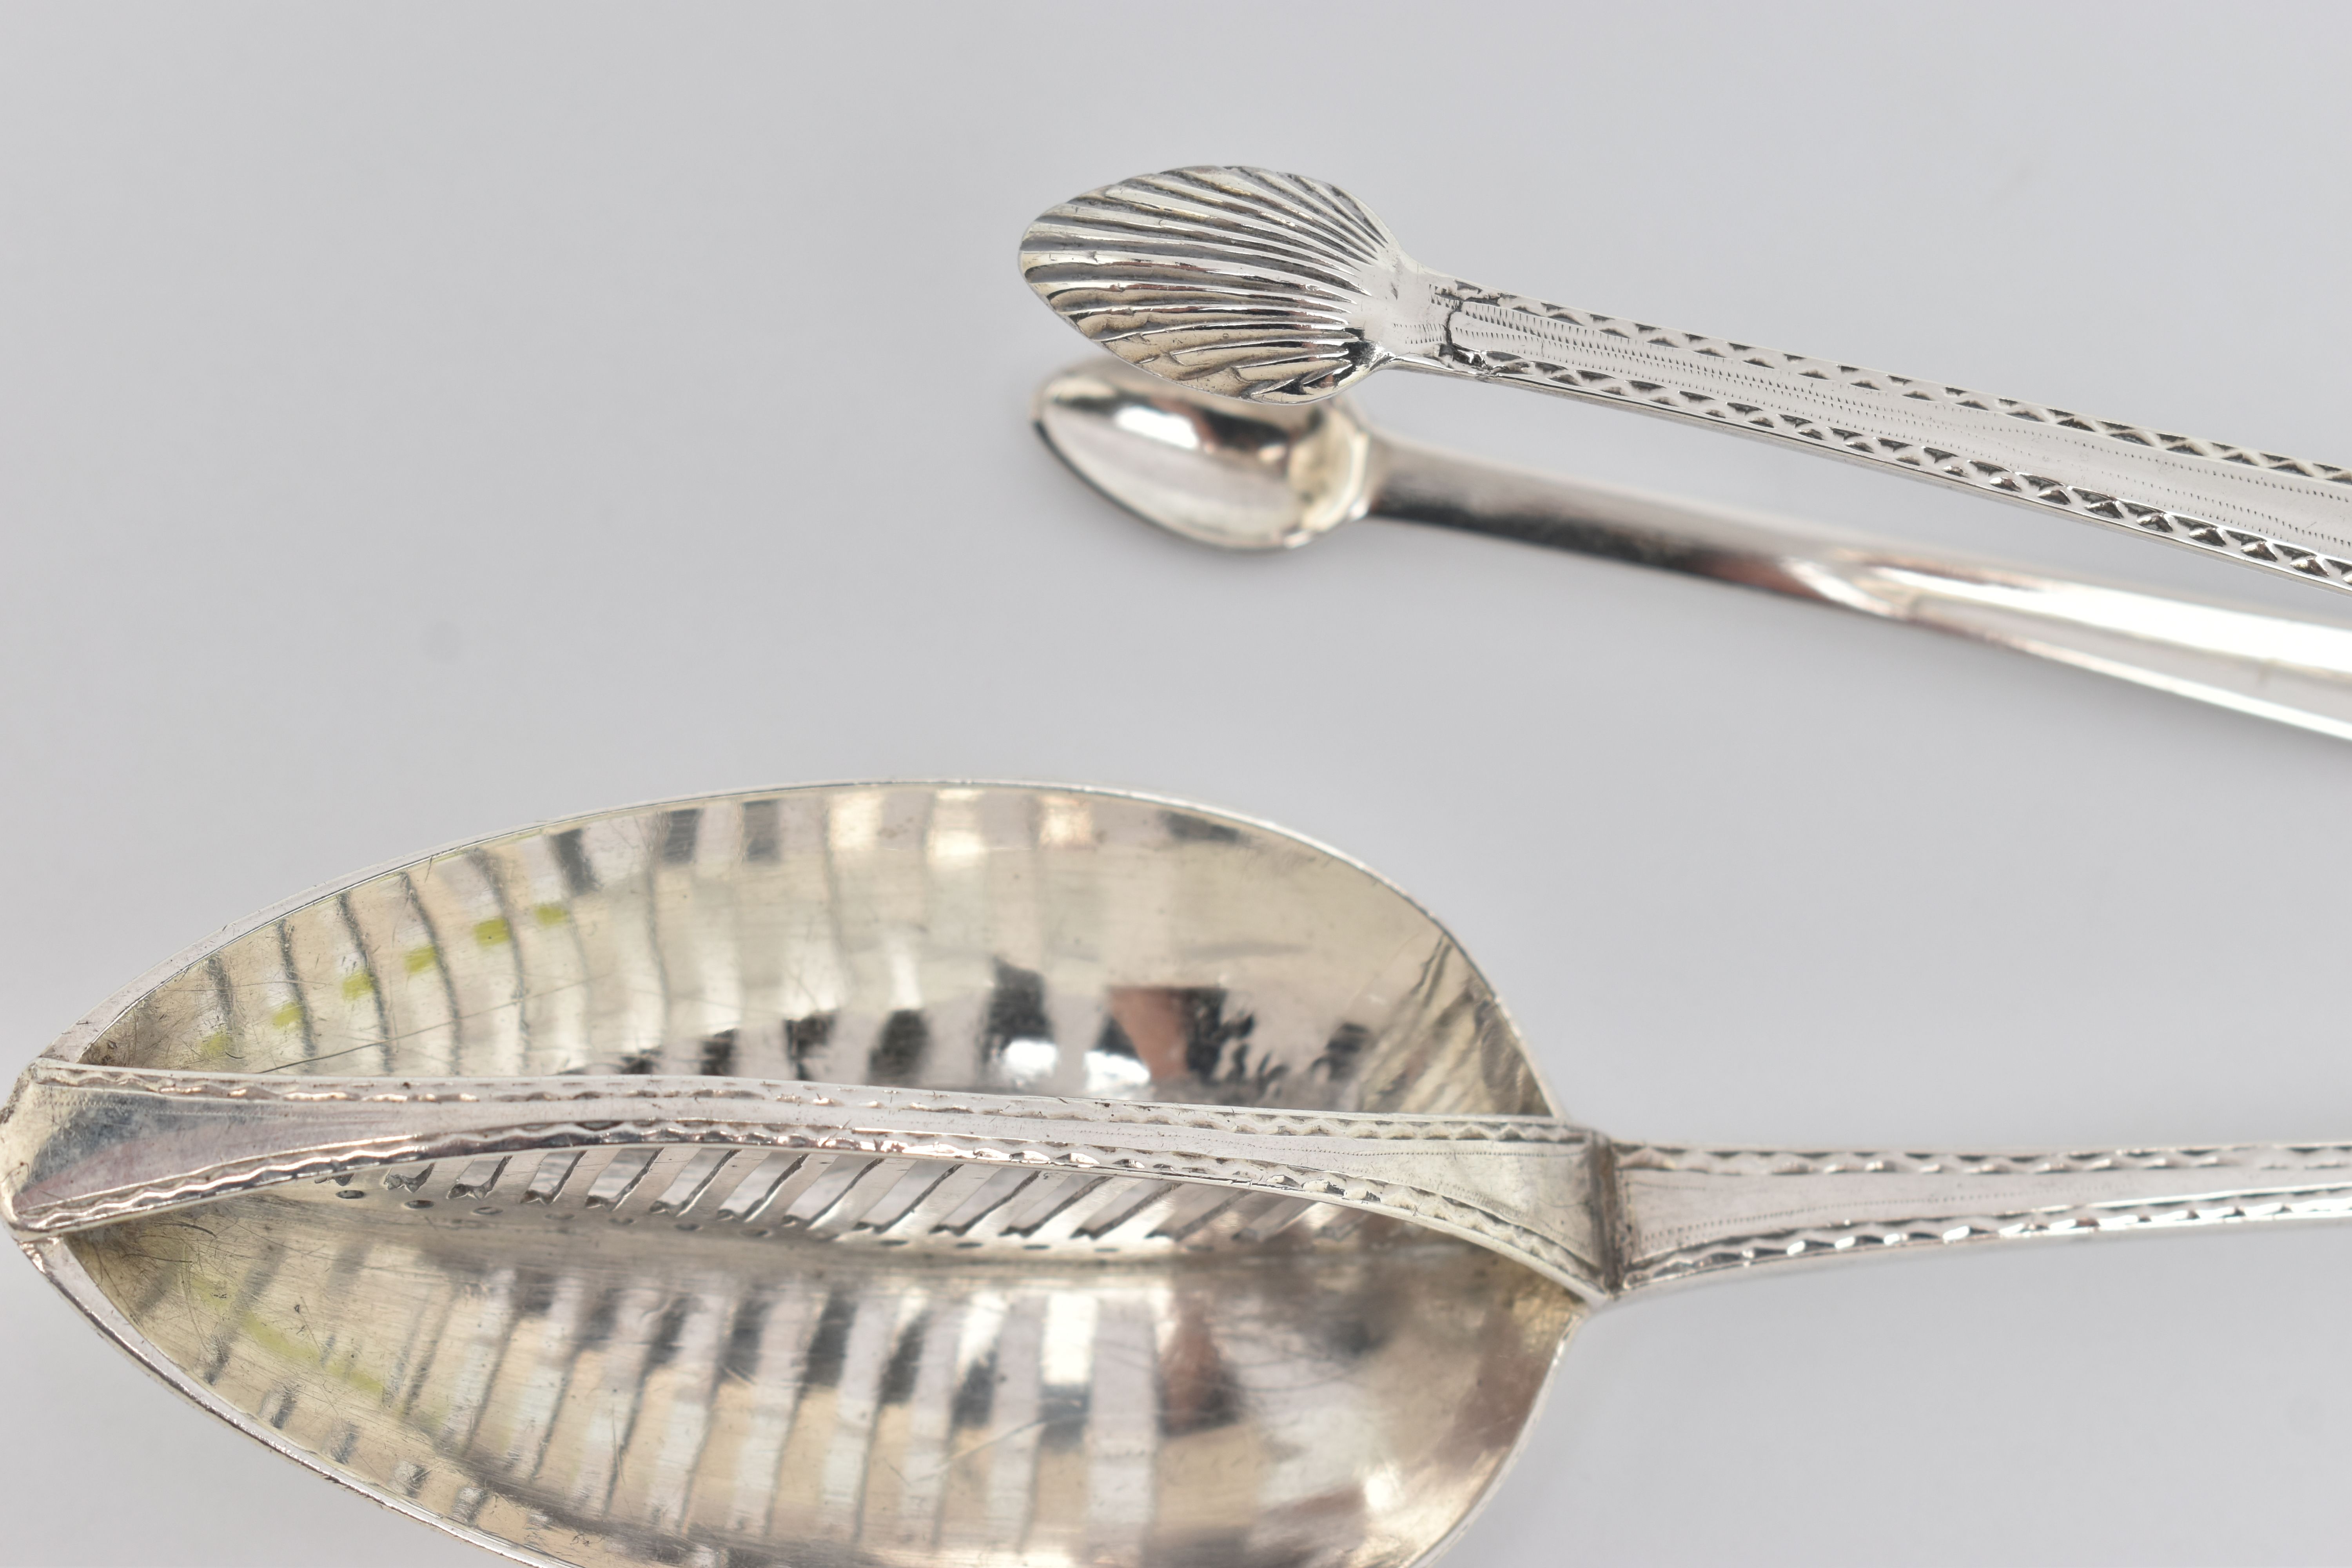 A LATE 18TH CENTURY IRISH SILVER GRAVY STRAINING SPOON AND A PAIR OF SUGAR TONGS WITH MATCHING - Image 4 of 6